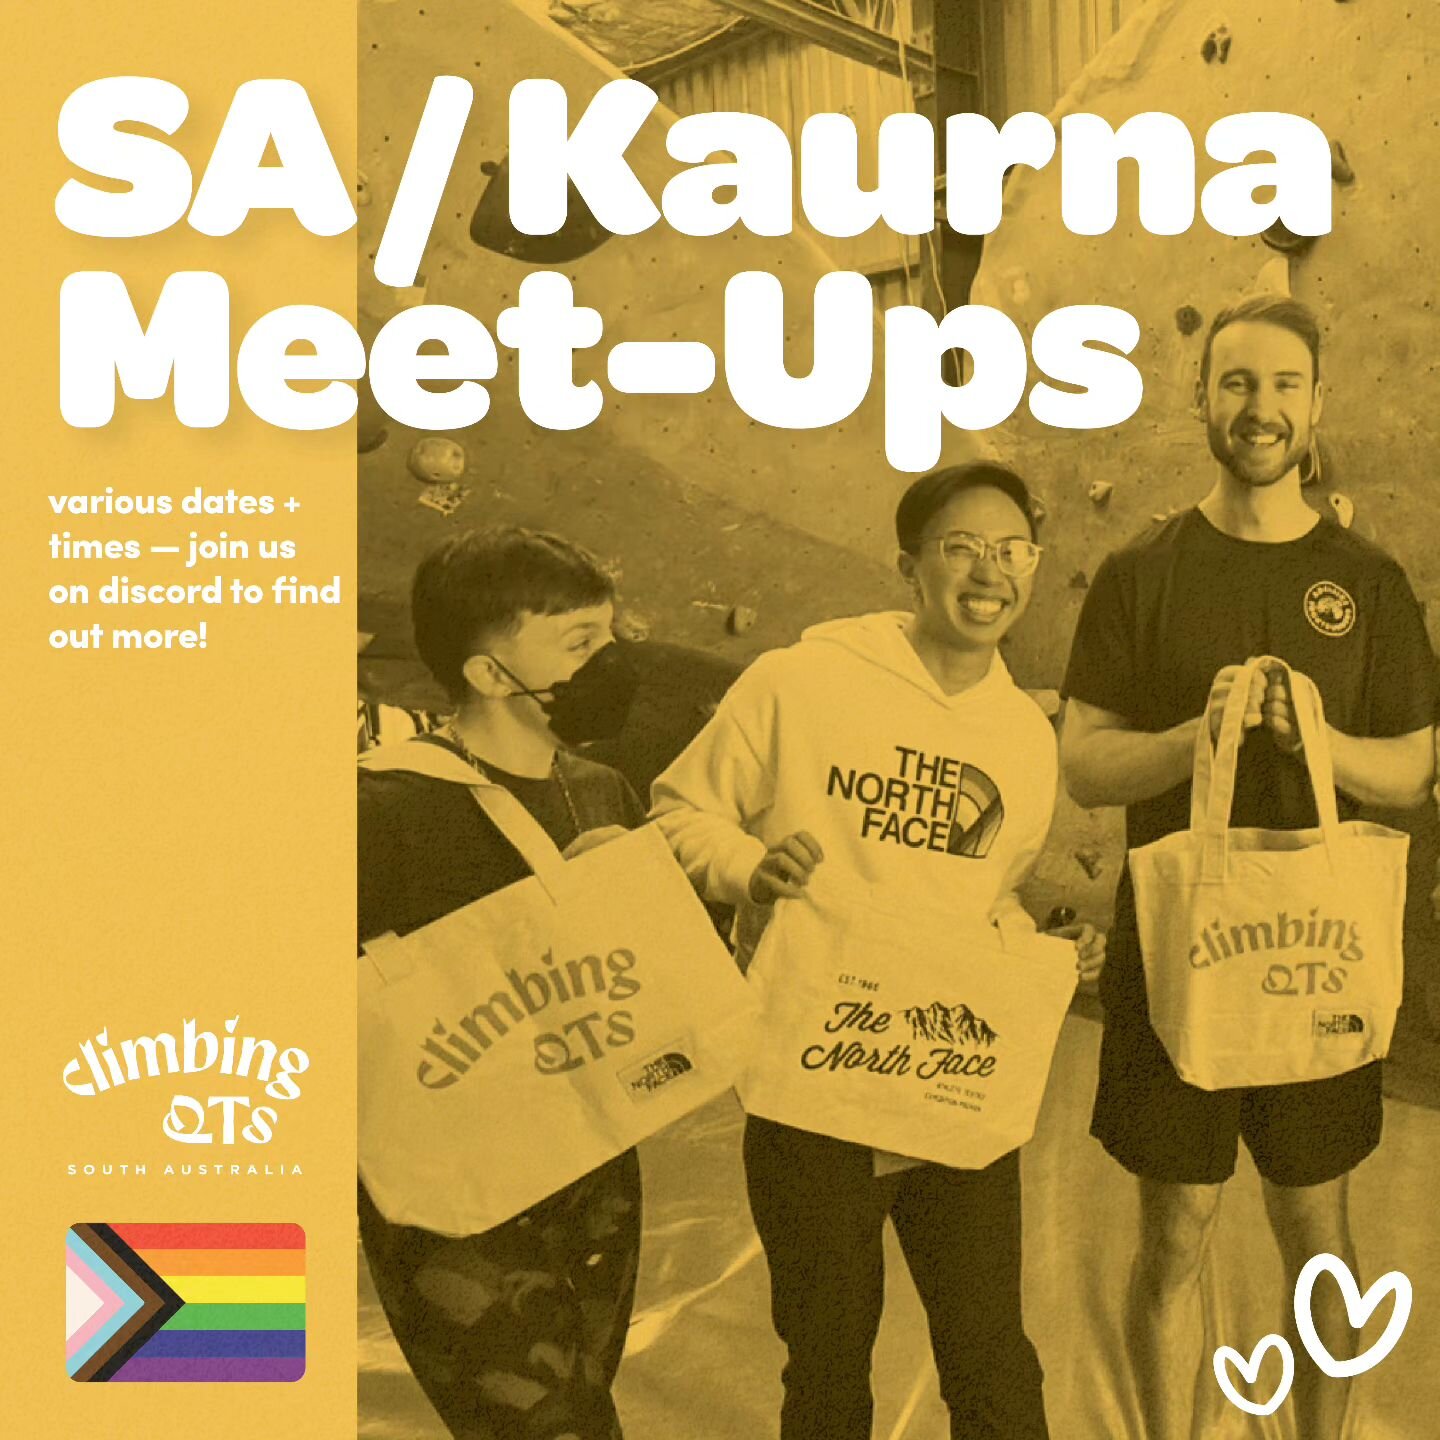 SA Kaurna meet-up this Sunday 28th 🌟🌟🌟

🍀 Where: Beyond Bouldering, Kent Town
When: Sunday, 9:30 - 11:30am (ACDT)

🍄 What to bring: A drink bottle and a snack (climbing is hungry work!)

Skill level: Beginner - no experience necessary! Never tri